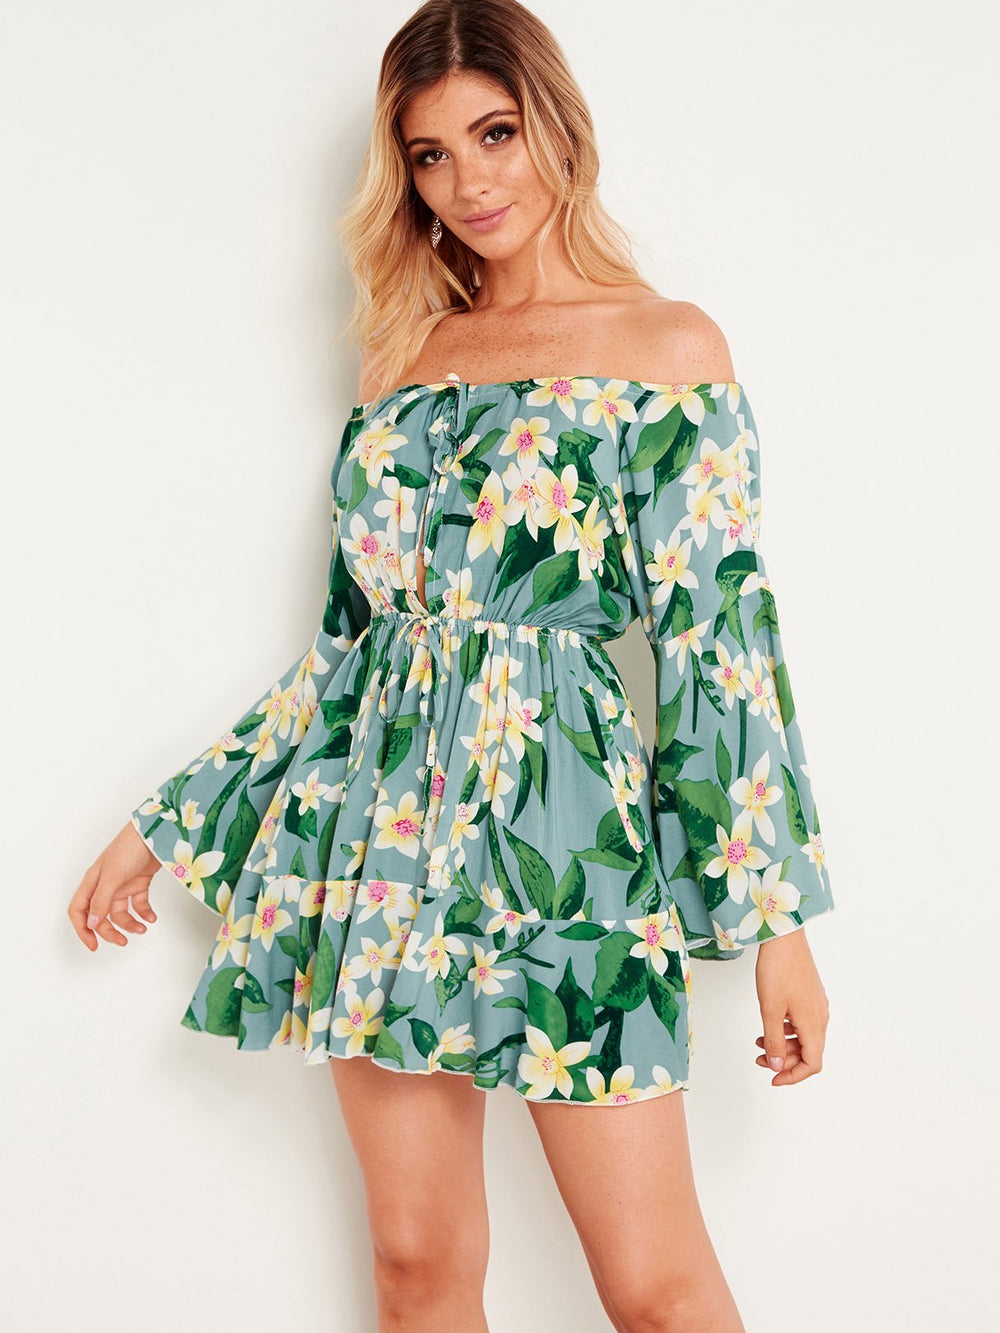 Green Off The Shoulder Long Sleeve Floral Print Cut Out Self-Tie Dresses